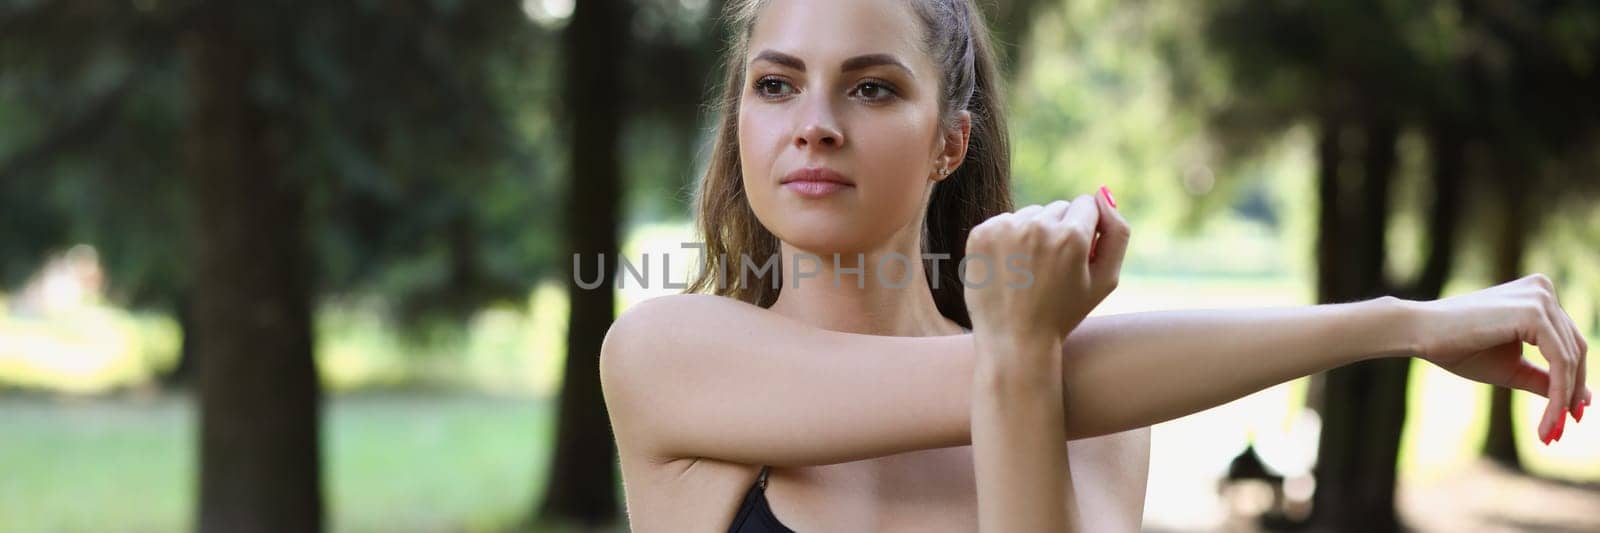 Beautiful young woman doing stretching exercises outdoors. Healthy women and sport concept